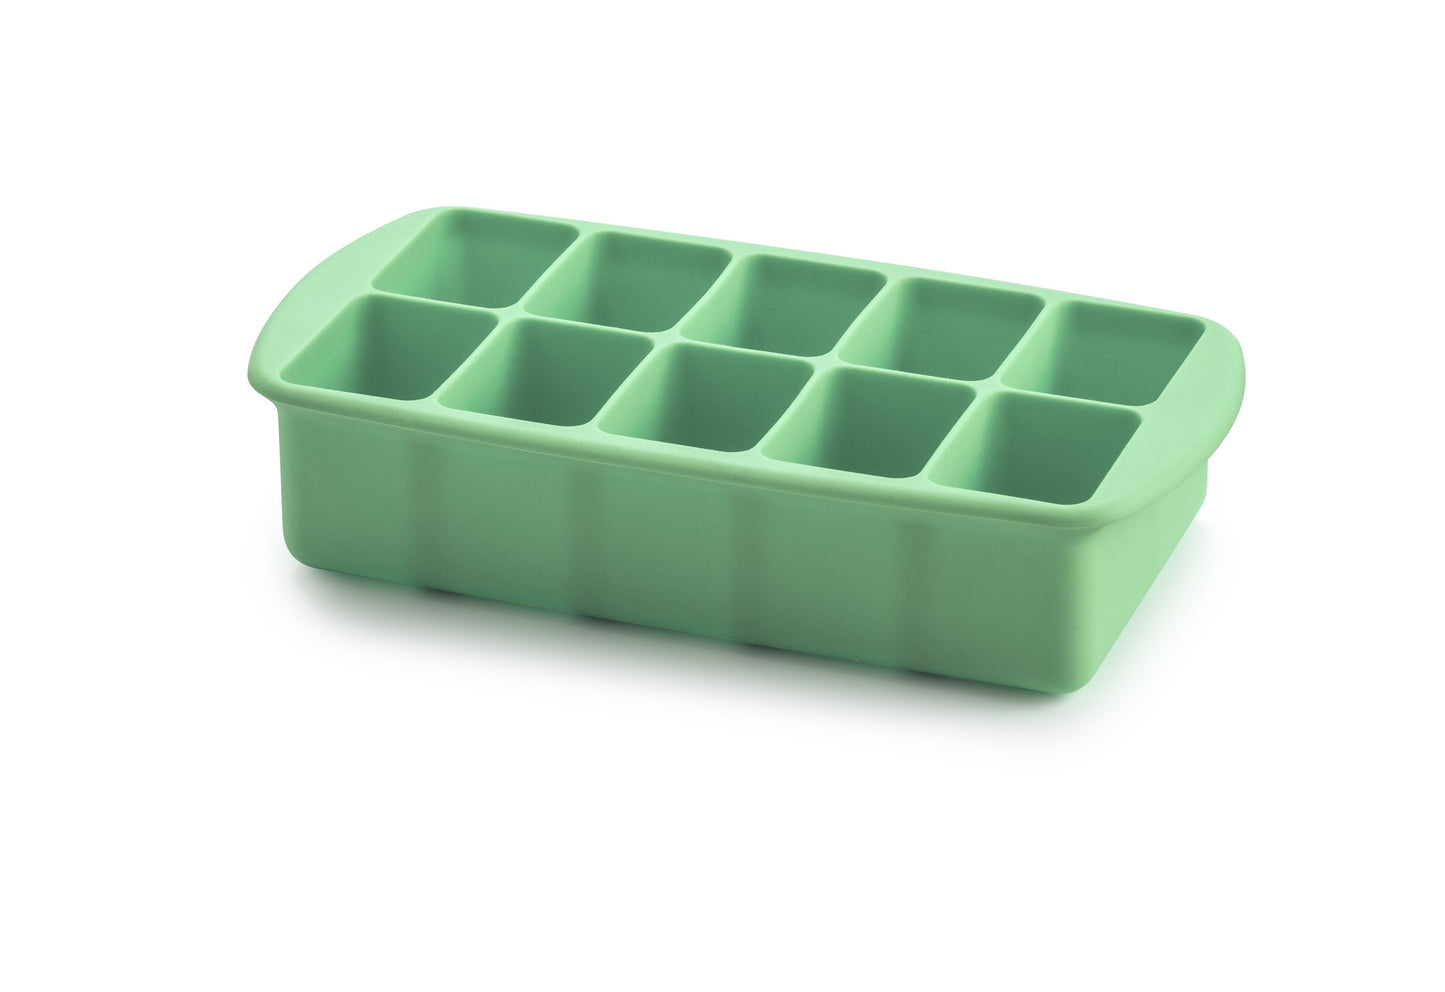 Silicone Baby Food Freezer Tray with Lid - Green